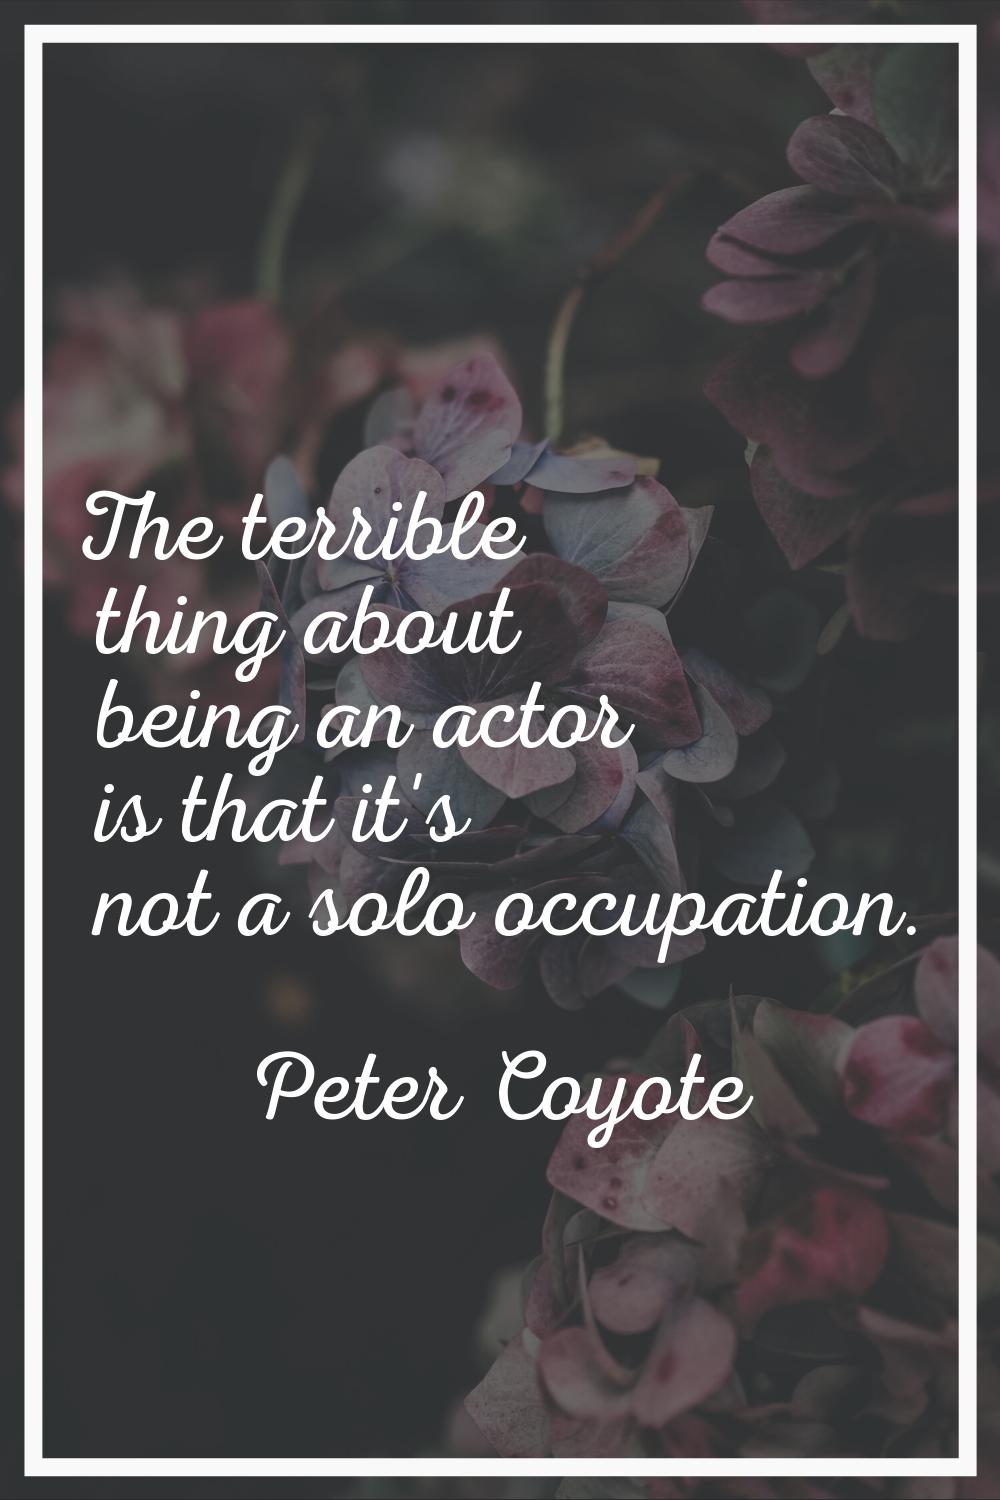 The terrible thing about being an actor is that it's not a solo occupation.